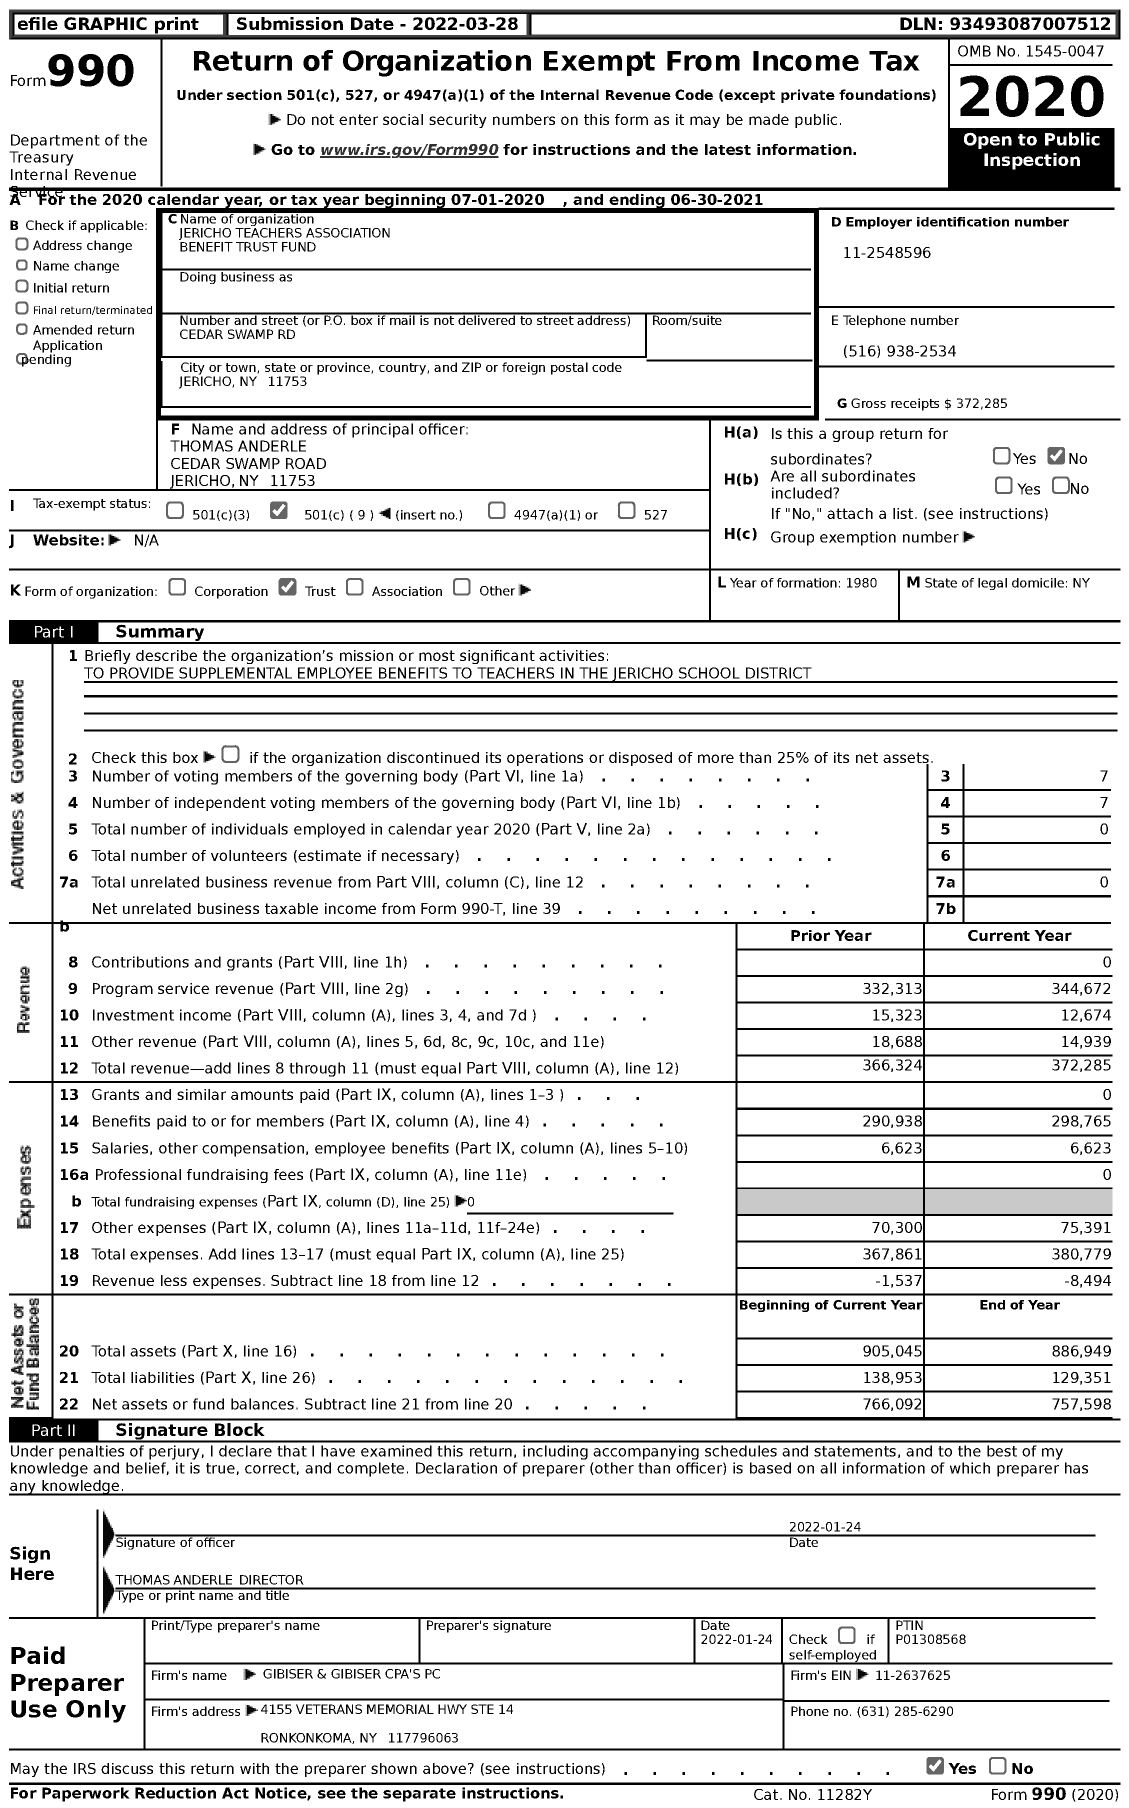 Image of first page of 2020 Form 990 for Jericho Teachers Association Benefit Trust Fund